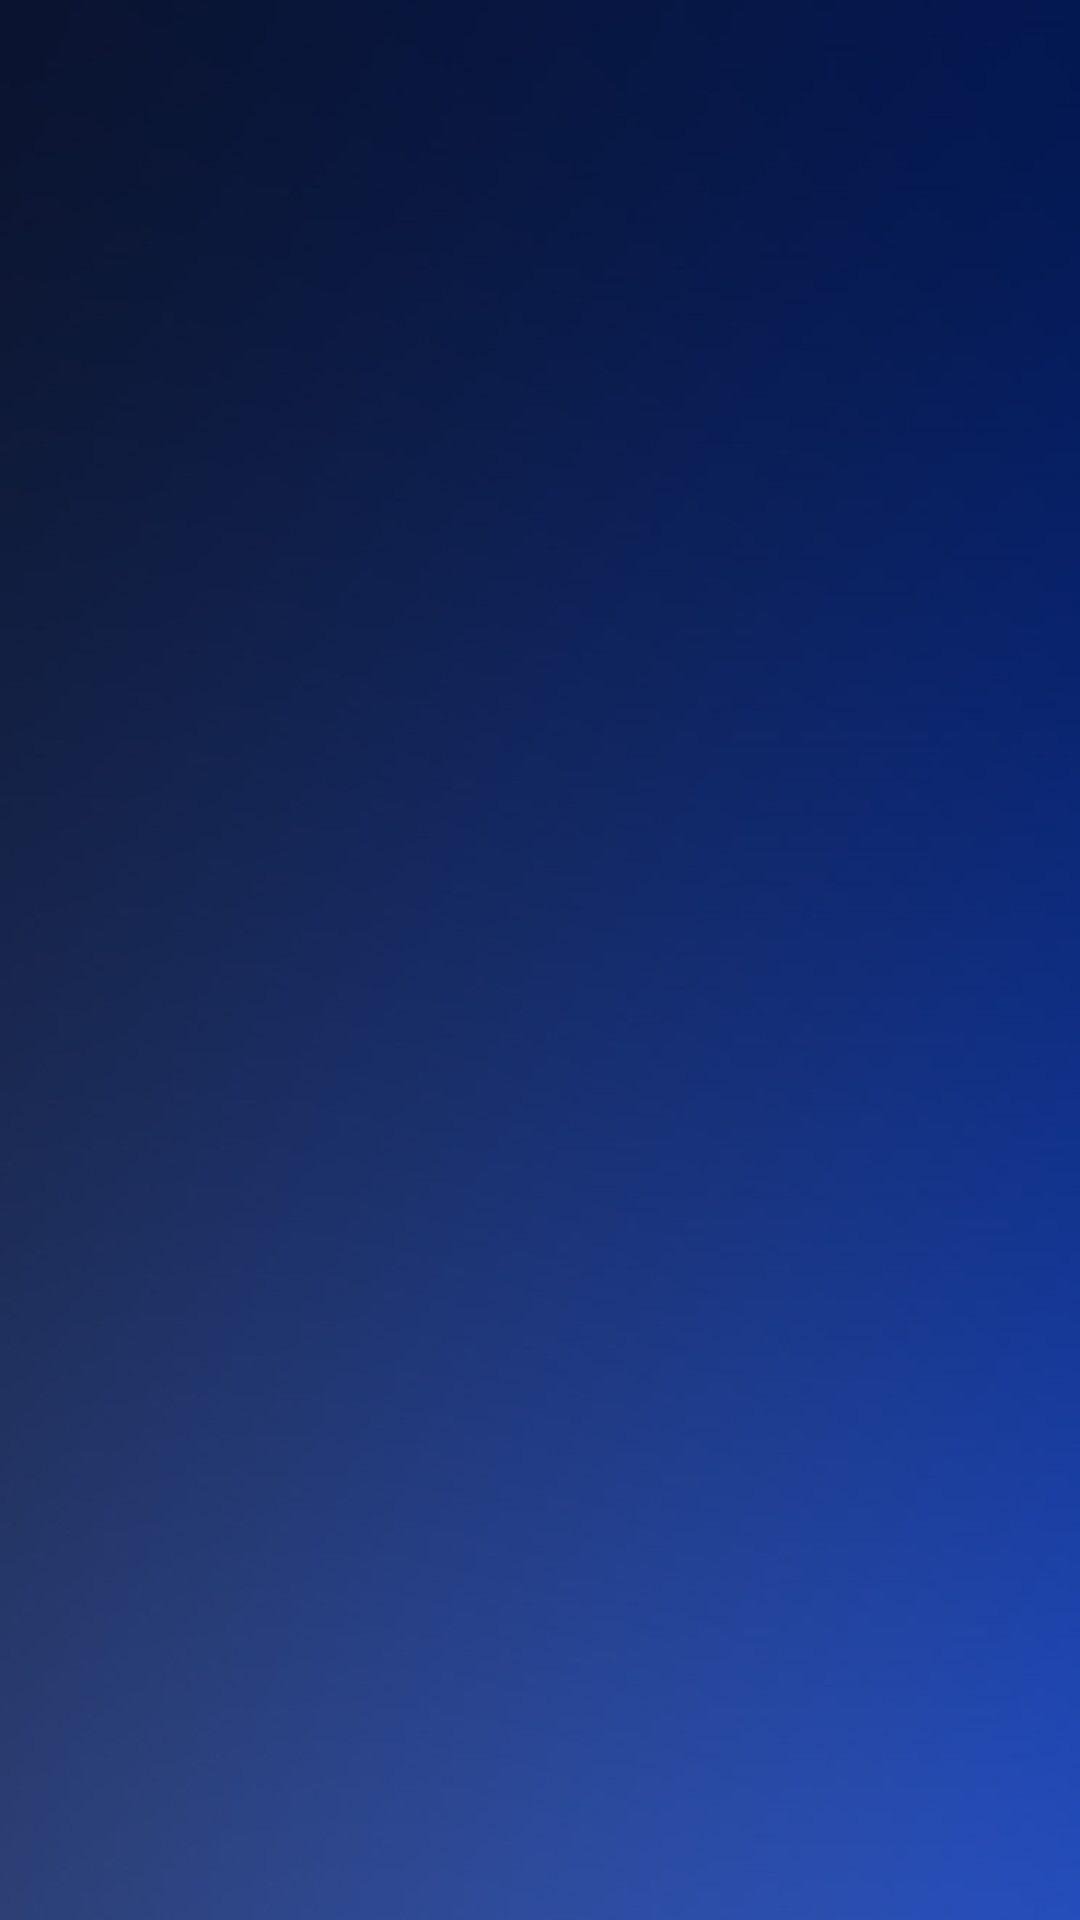 iPhoneXpapers.com | iPhone X wallpaper | vn22-cube-dark-blue -abstract-pattern